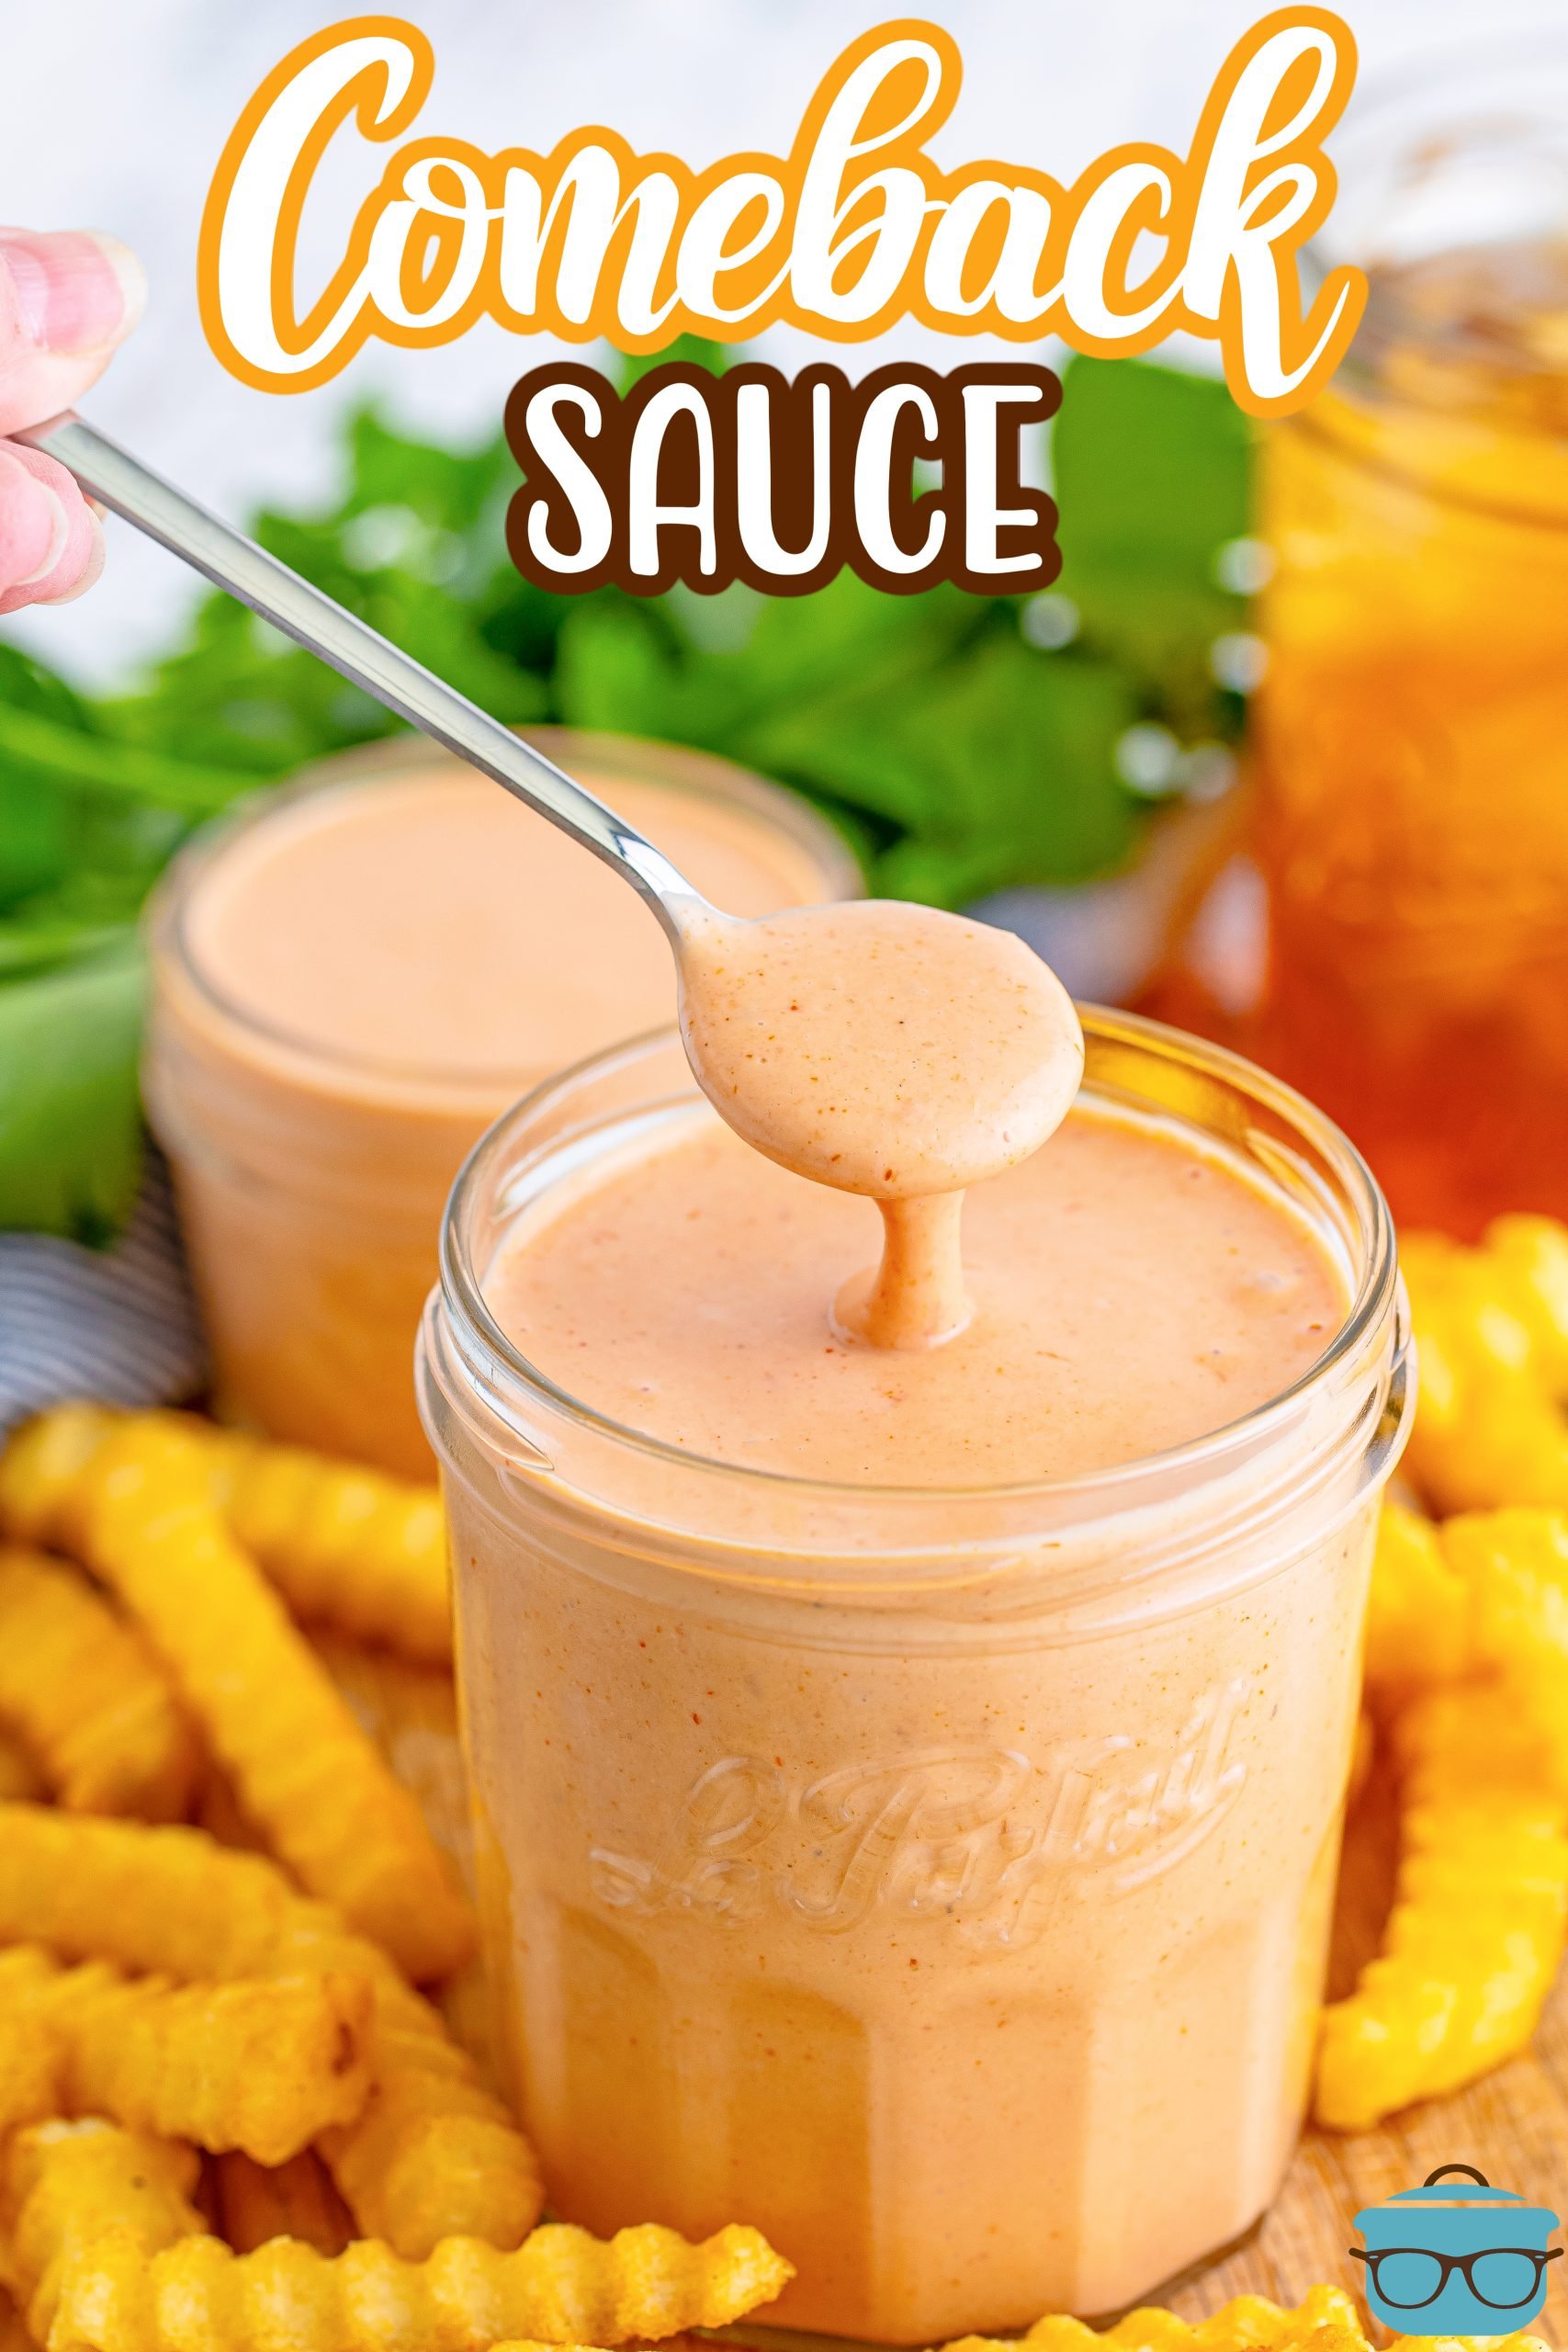 A spoon holding a scoop of Comeback Sauce above a jar.